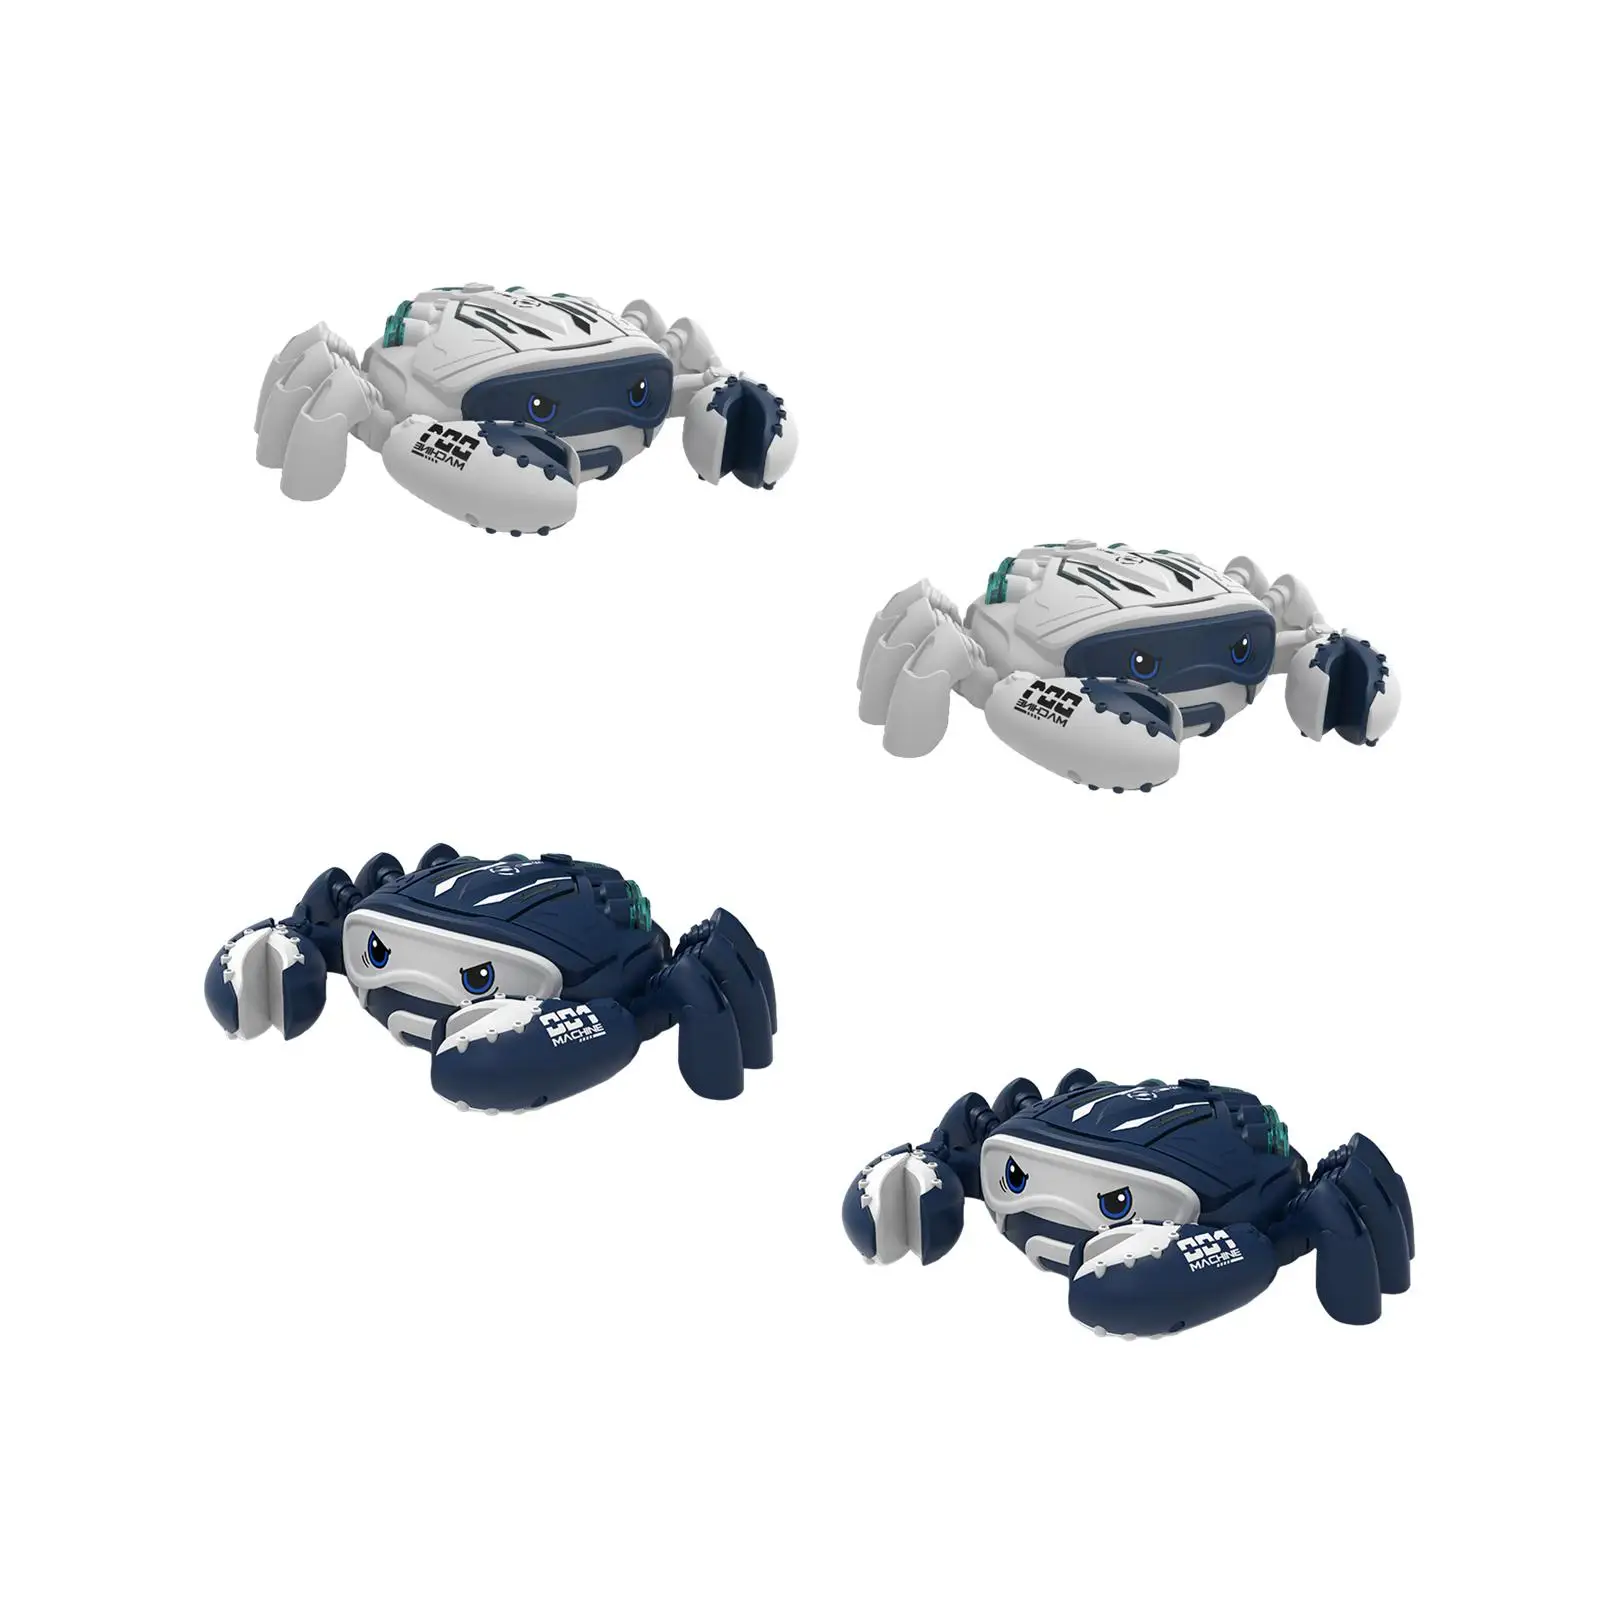 Crawling Toy Crabs Baby Toys Interactive Electric Walking Toys for Children Infant Toys with Light & Music Babies Boy Girl Gifts